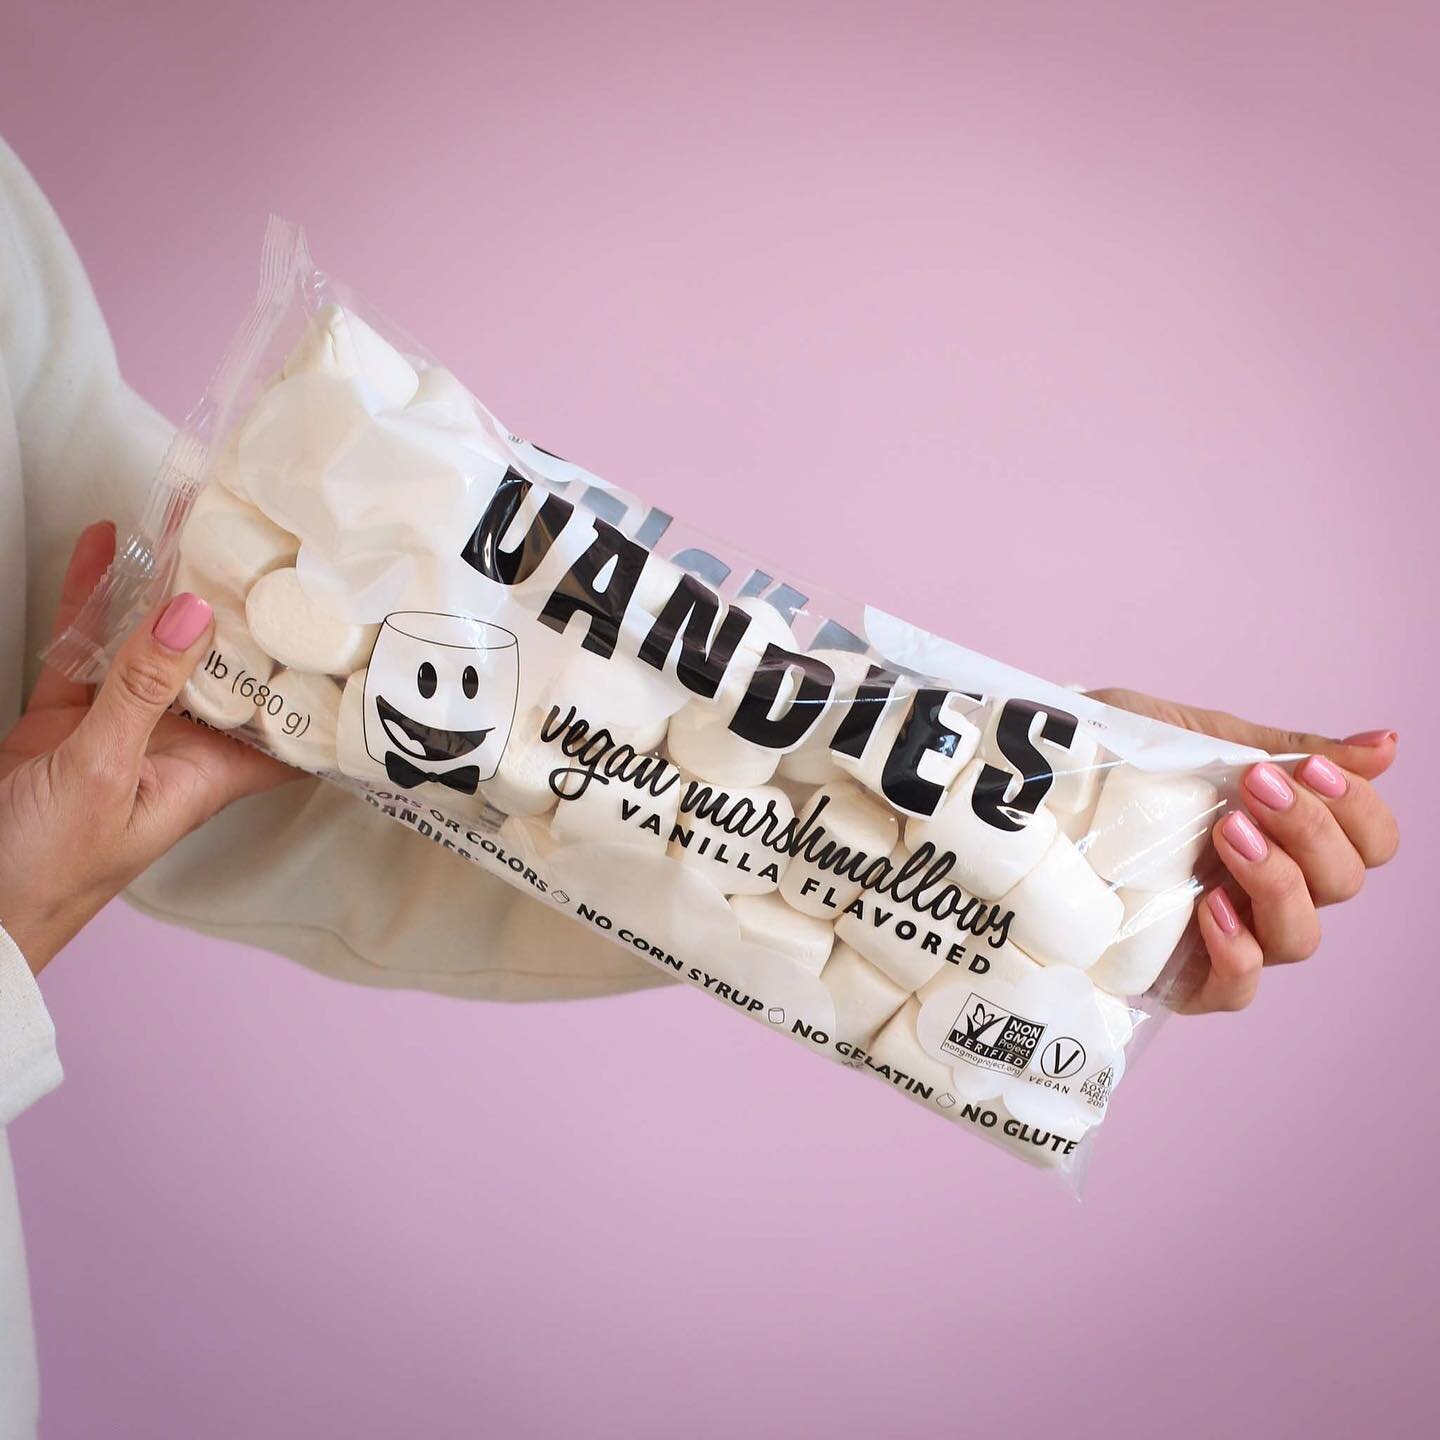 Sun&rsquo;s shining ☀️ people are smiling 😊 time to plan some outdoor fun and these beauties make the perfect addition for campfires and BBQ&rsquo;s and they&rsquo;re great for dipping in melted Choc! 

Everyone loves our @dandiesuk BBQ Marshmallows